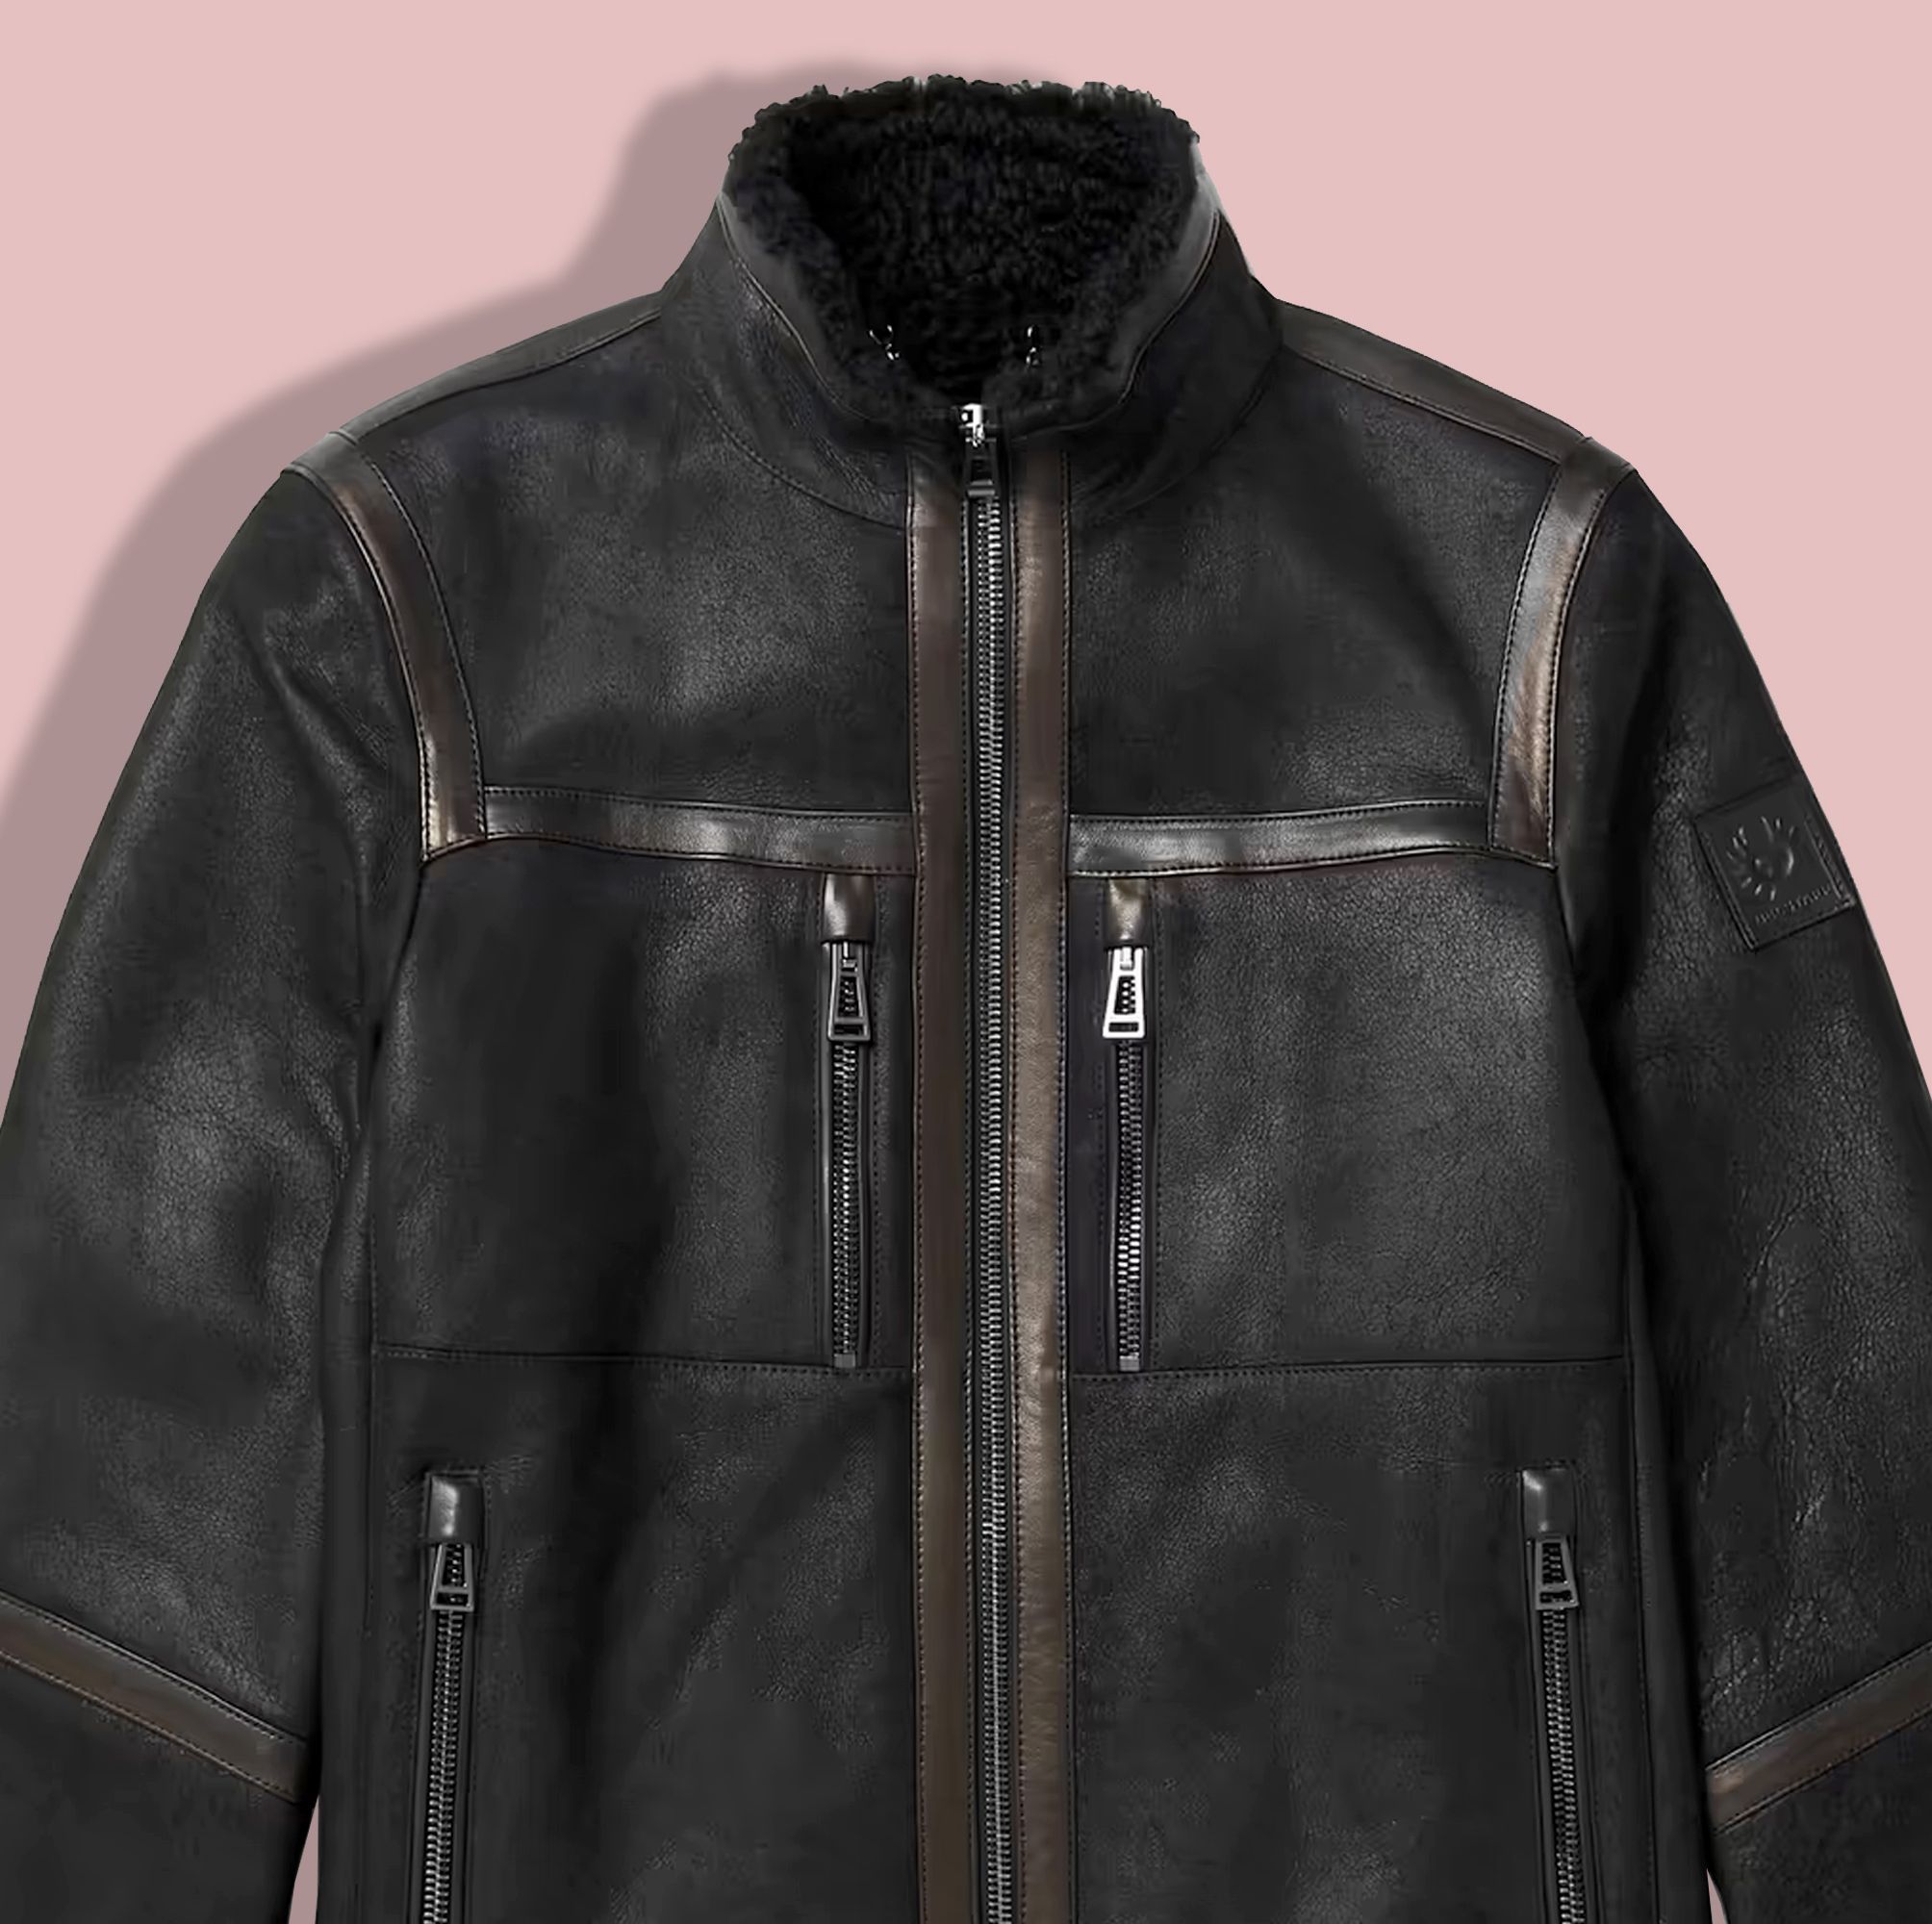 The Shearling Jacket Isn't Just an Outerwear Style—It's a Lifestyle